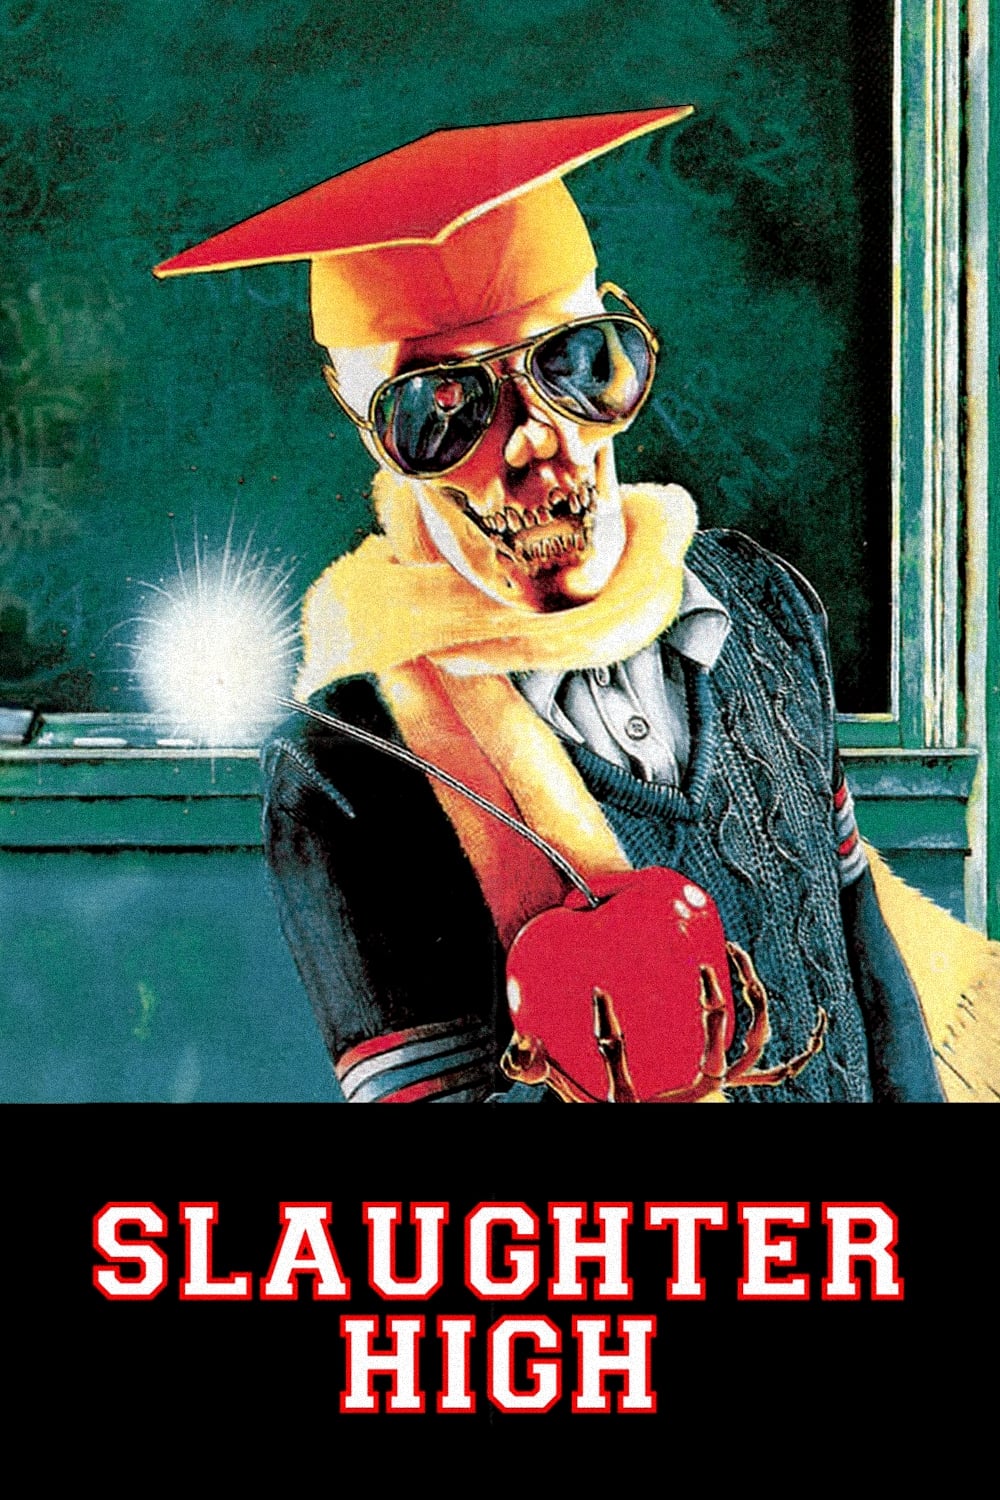 Krwawy odwet / Slaughter High  1986